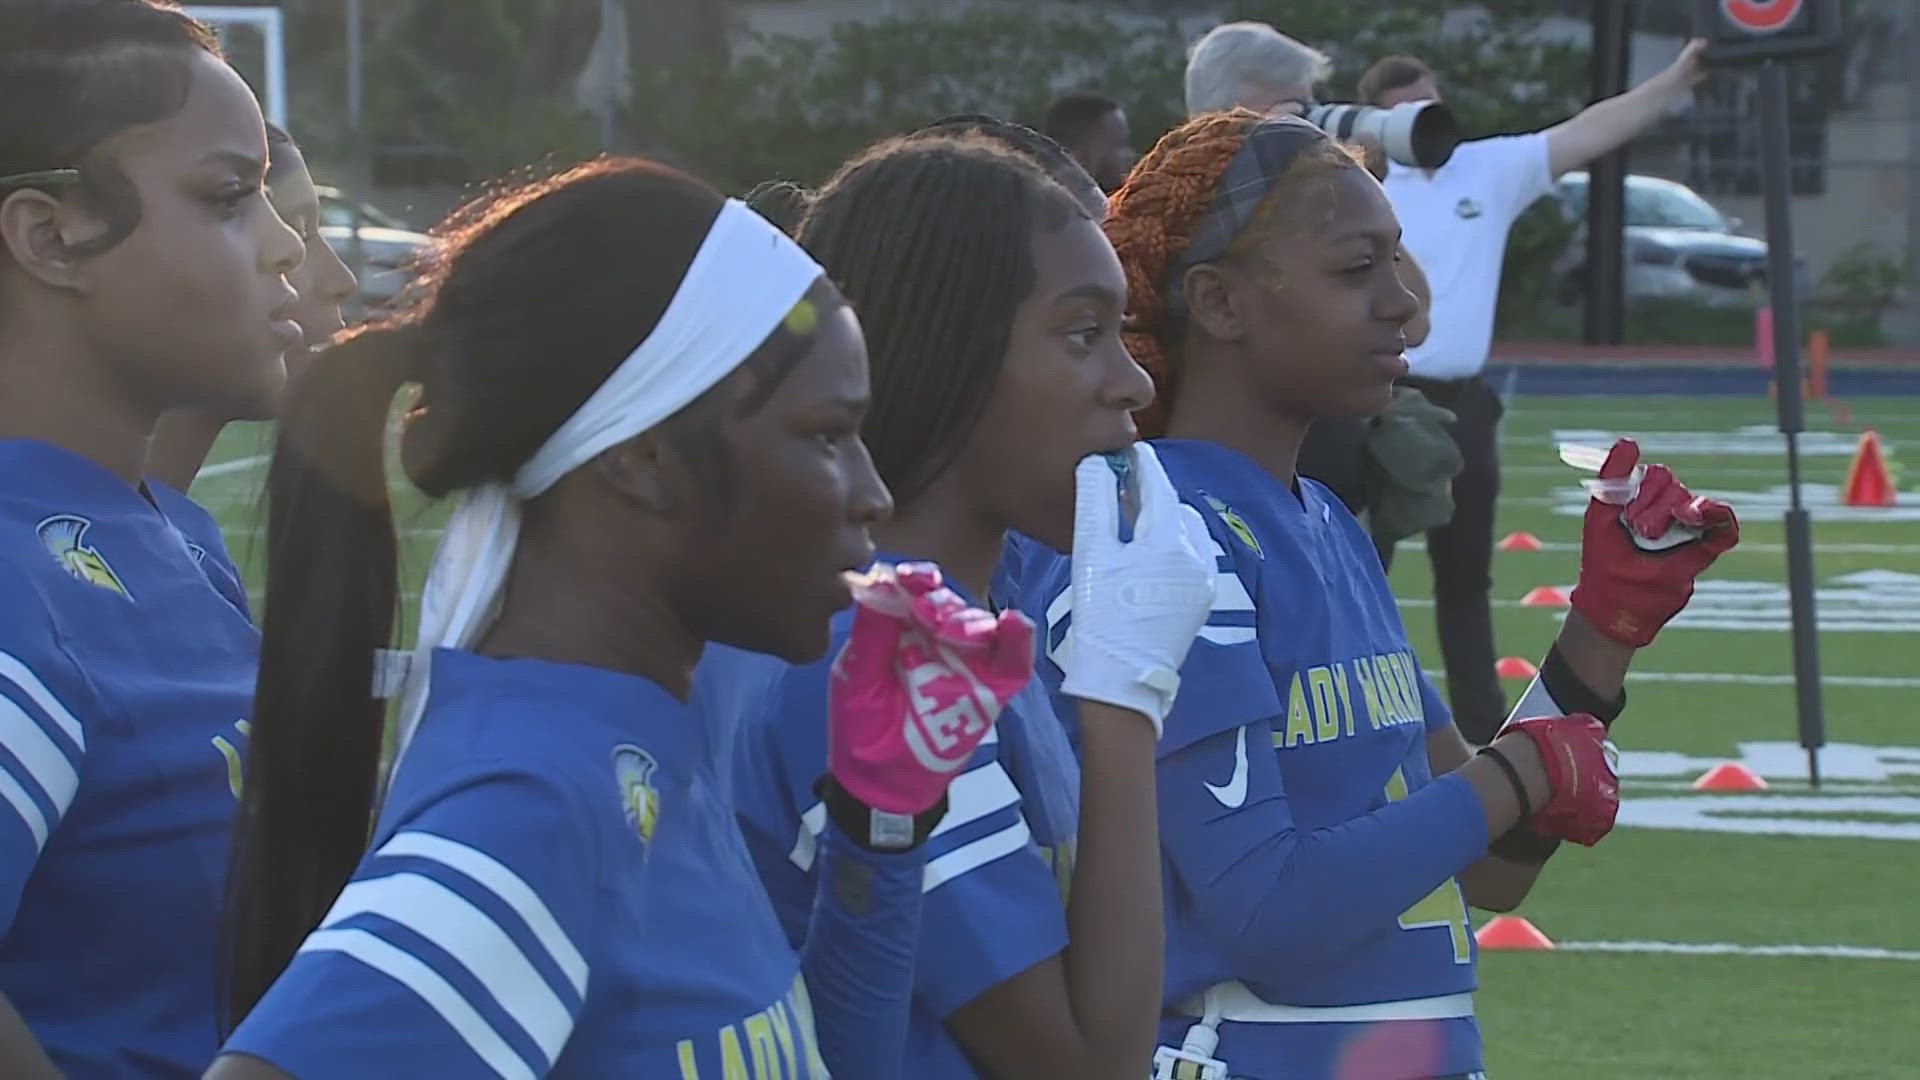 Girls flag football hopes to become a sanctioned high school sport in Louisiana.